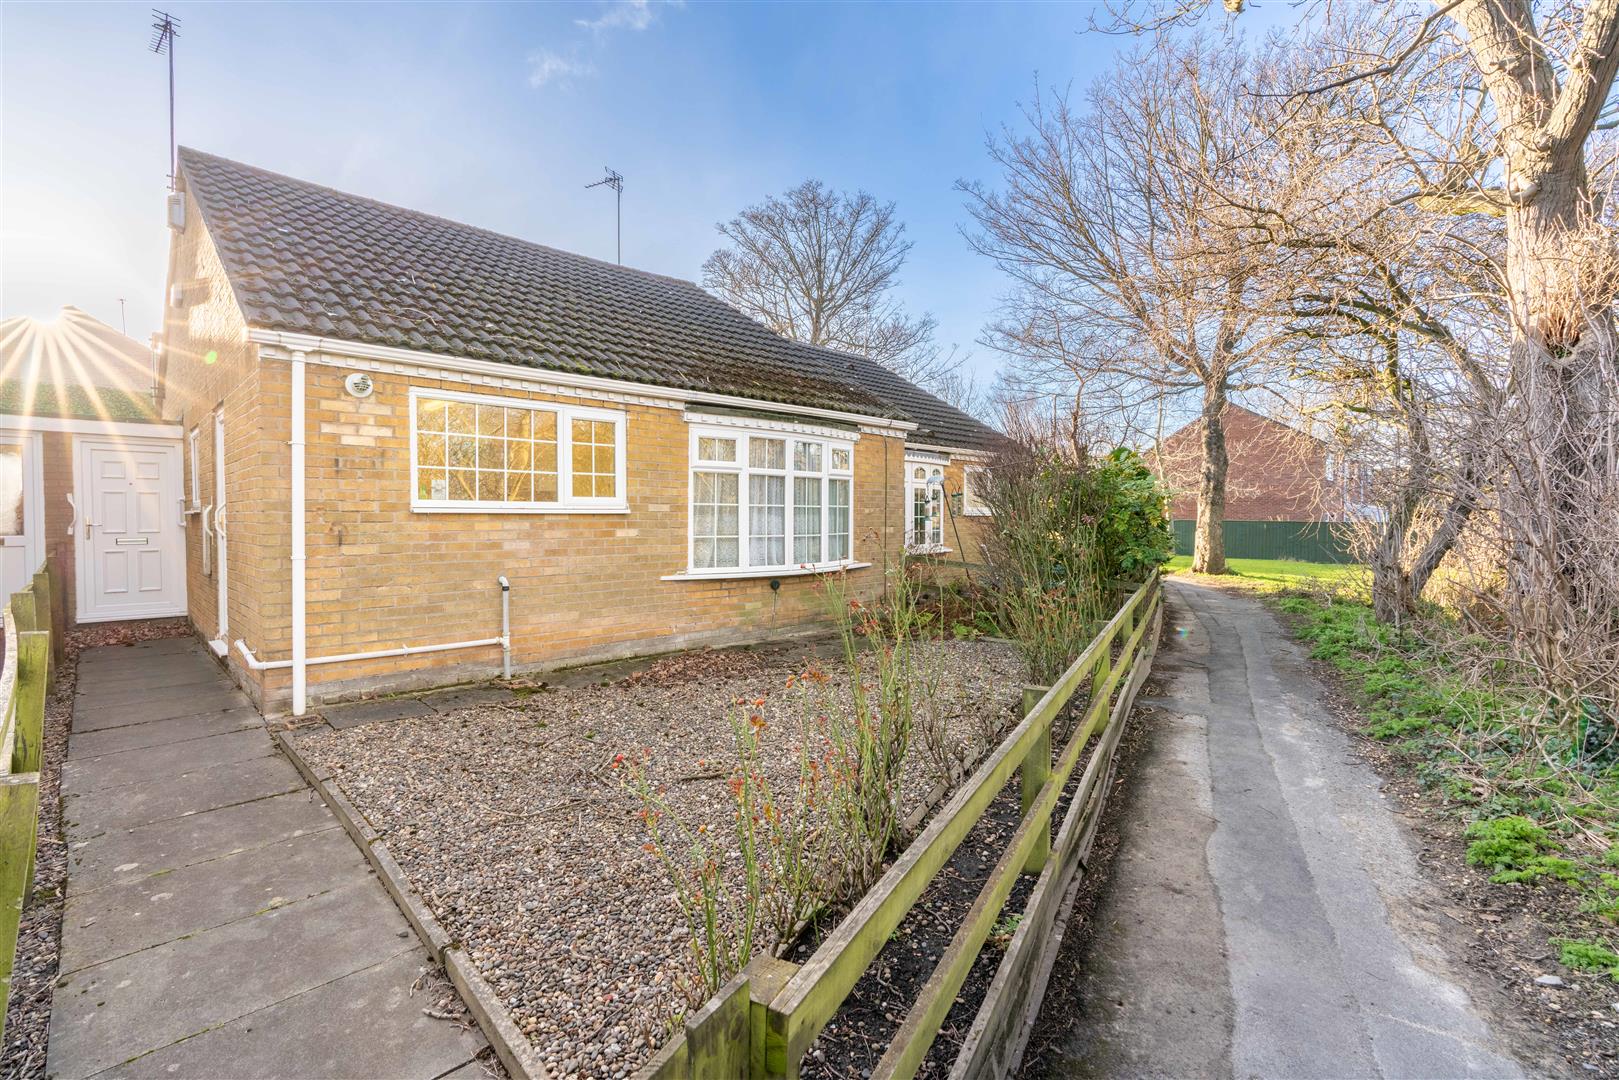 2 bed semi-detached bungalow for sale in Salters Court, Newcastle Upon Tyne, NE3 